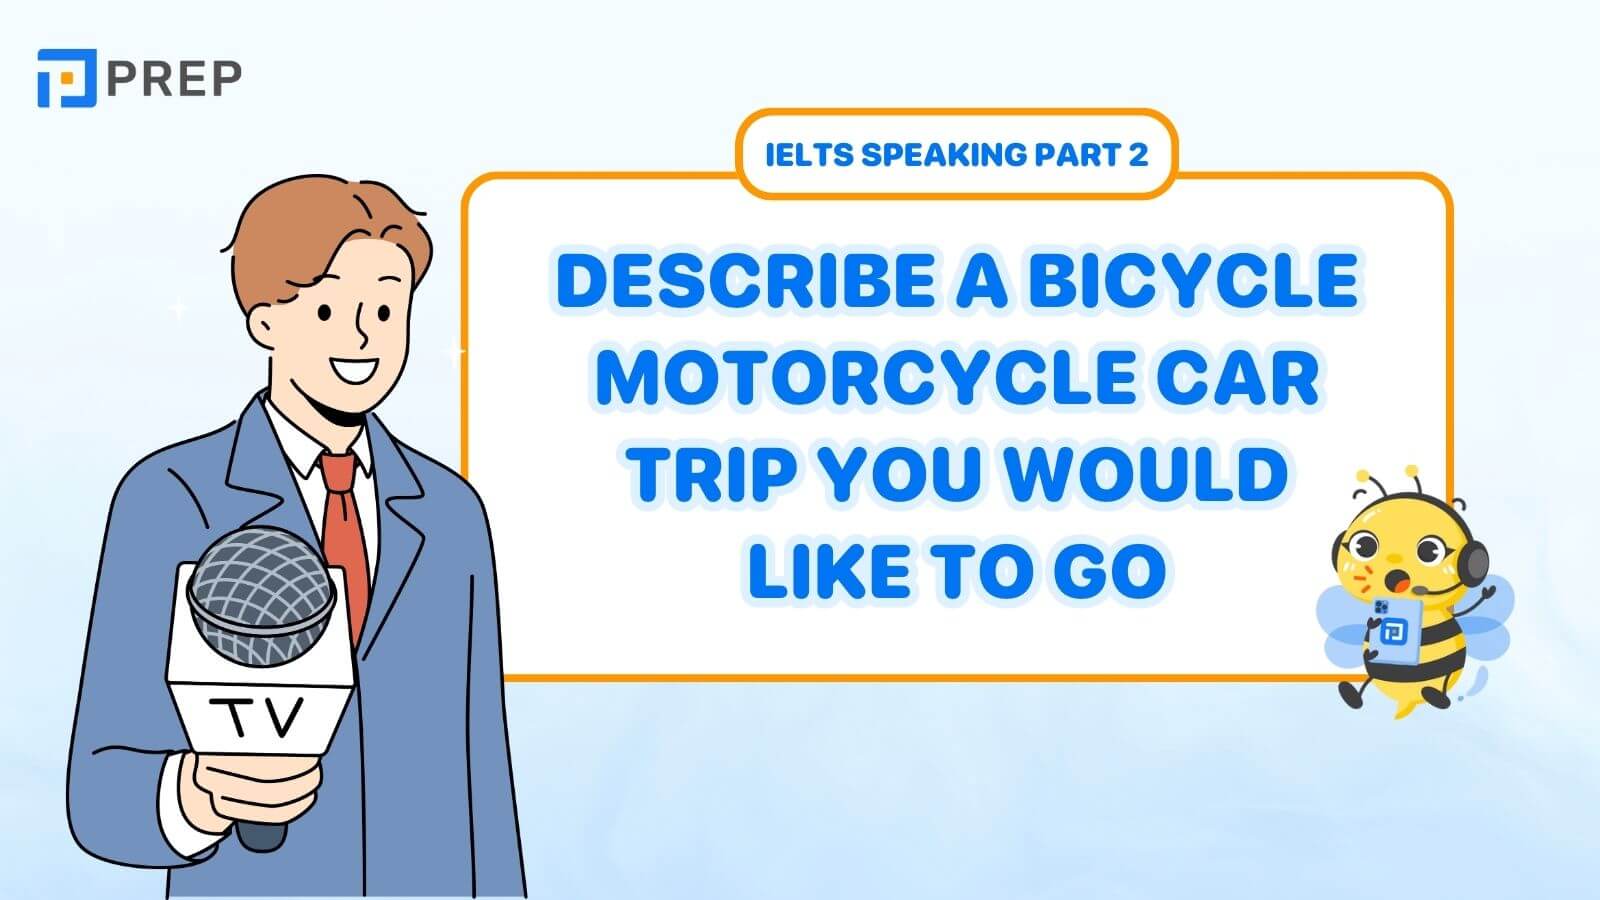 Describe a bicycle, motorcycle car trip you would like to go